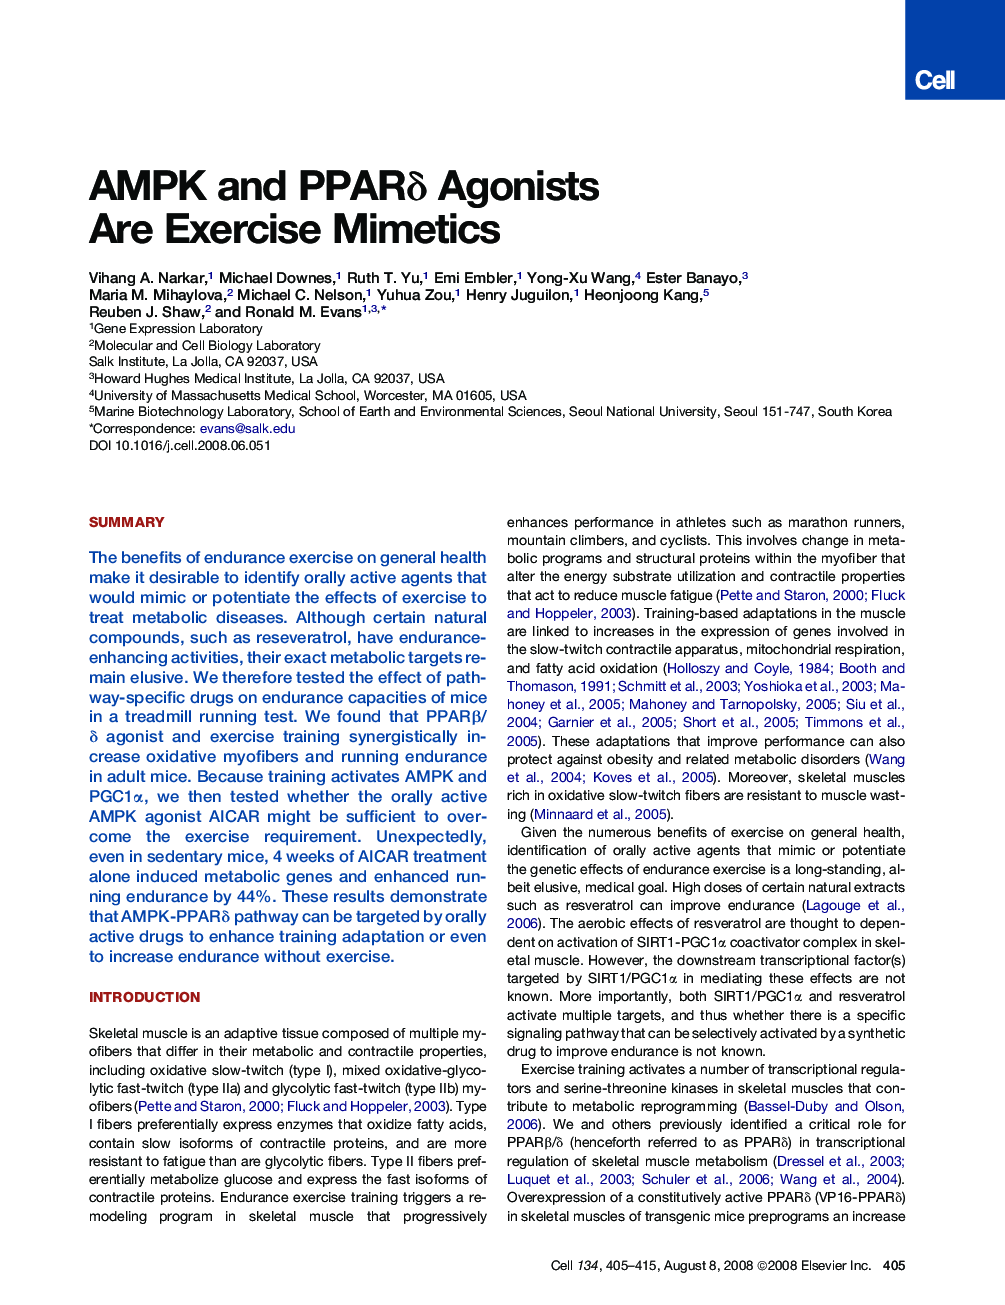 AMPK and PPARδ Agonists Are Exercise Mimetics